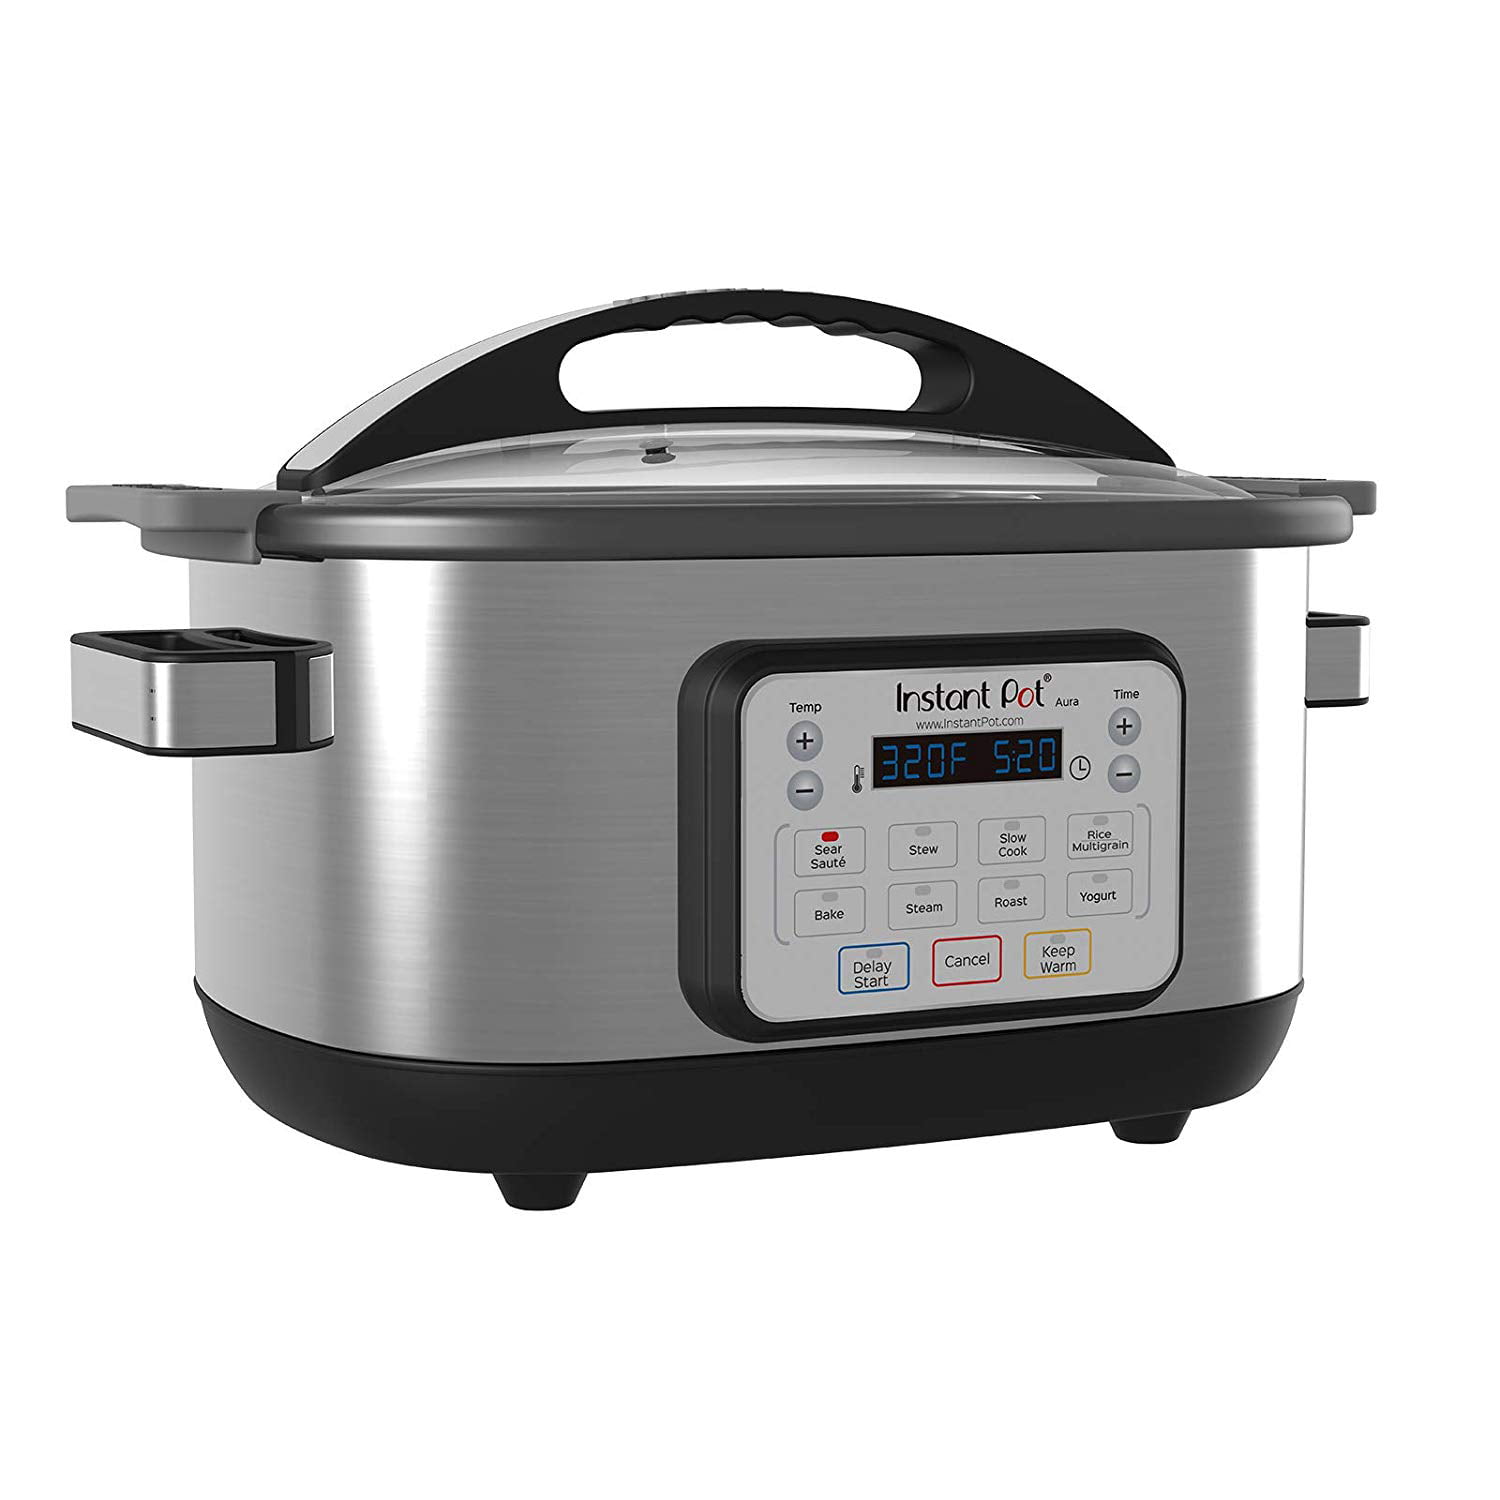 Instant Pot Aura Multi-Use Programmable Slow Cooker, 6 Quart, No Pressure  Cooking Functionality 